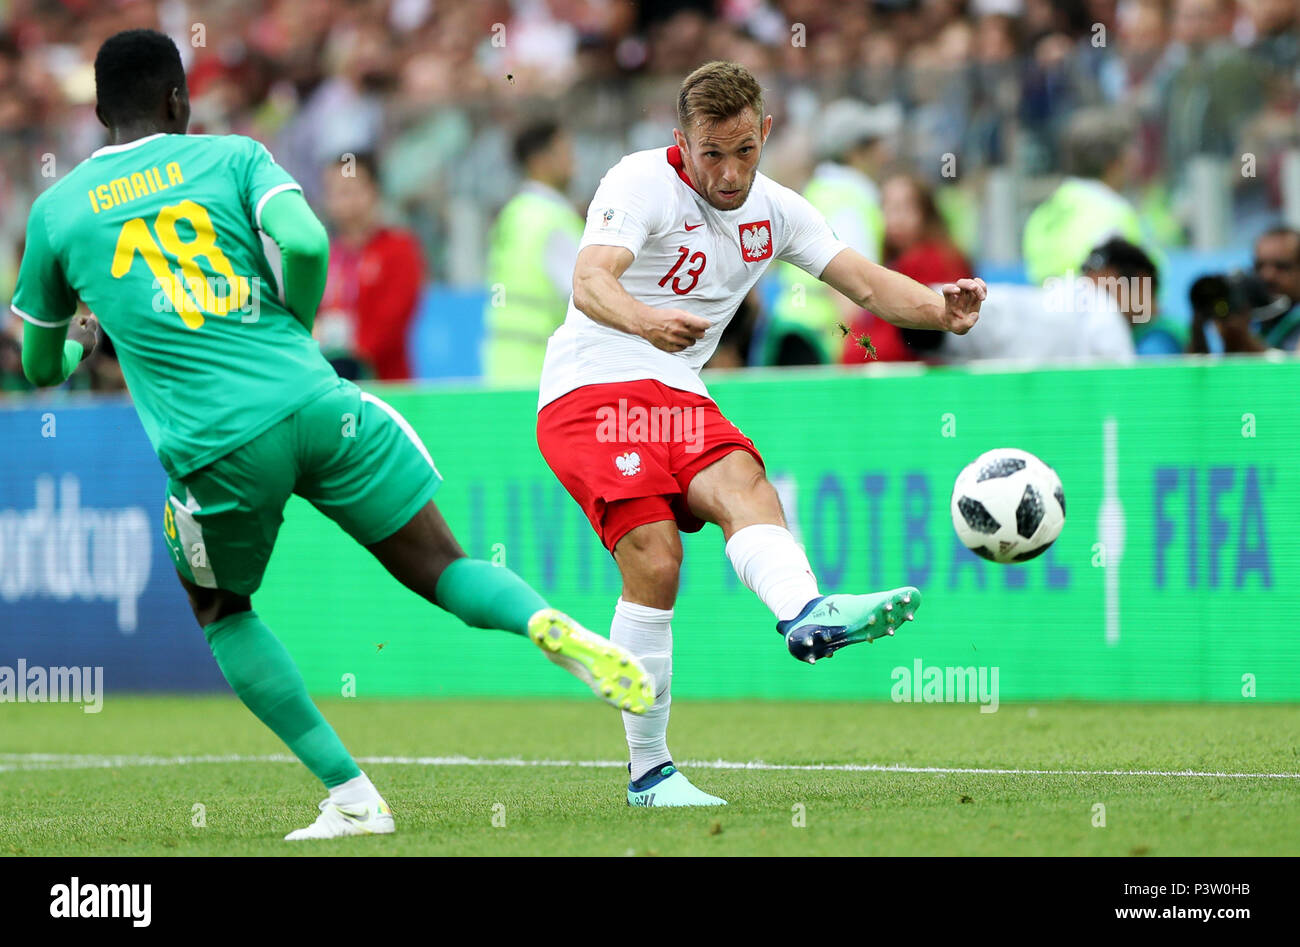 Moscow, Russia. 19th June, 2018. Maciej Rybus (R) of Poland passes the ball during a Group H match between Poland and Senegal at the 2018 FIFA World Cup in Moscow, Russia, June 19, 2018. Credit: Xu Zijian/Xinhua/Alamy Live News Stock Photo